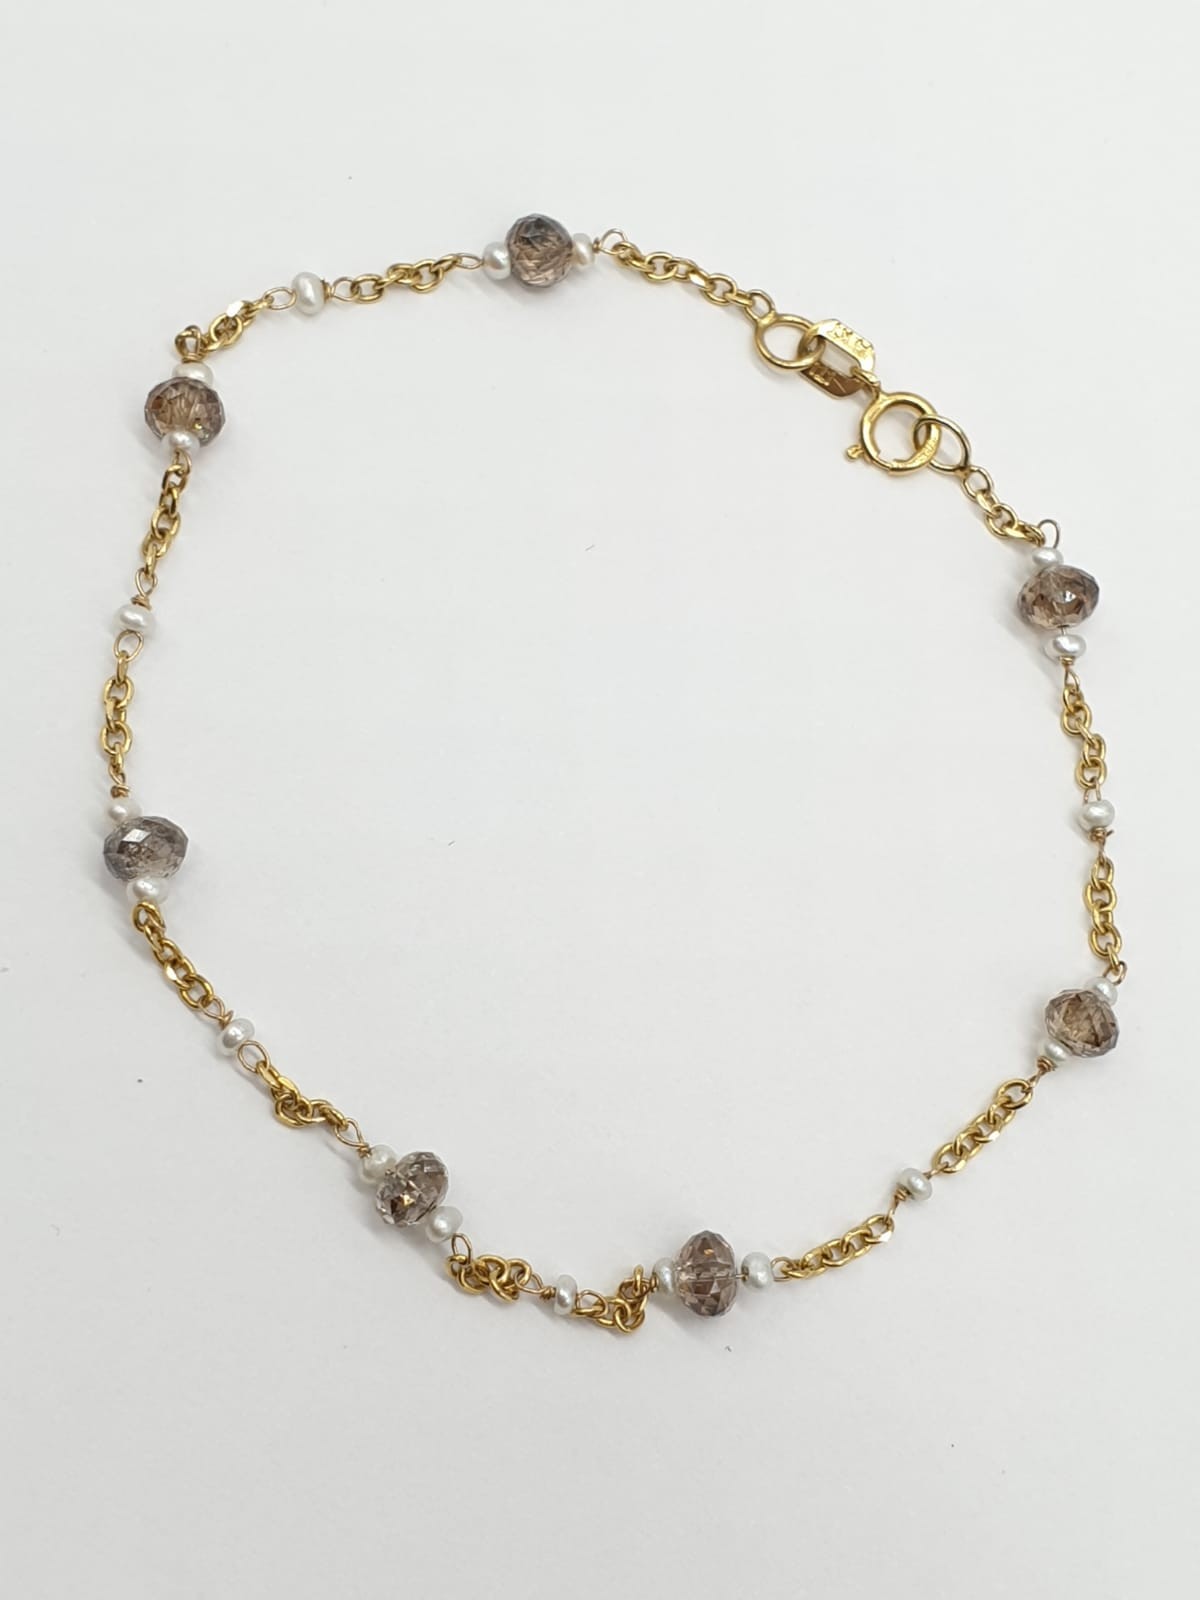 14ct gold brown diamond and pearl necklace with matching bracelet, total weight 5.6g and over 9ct - Image 2 of 6